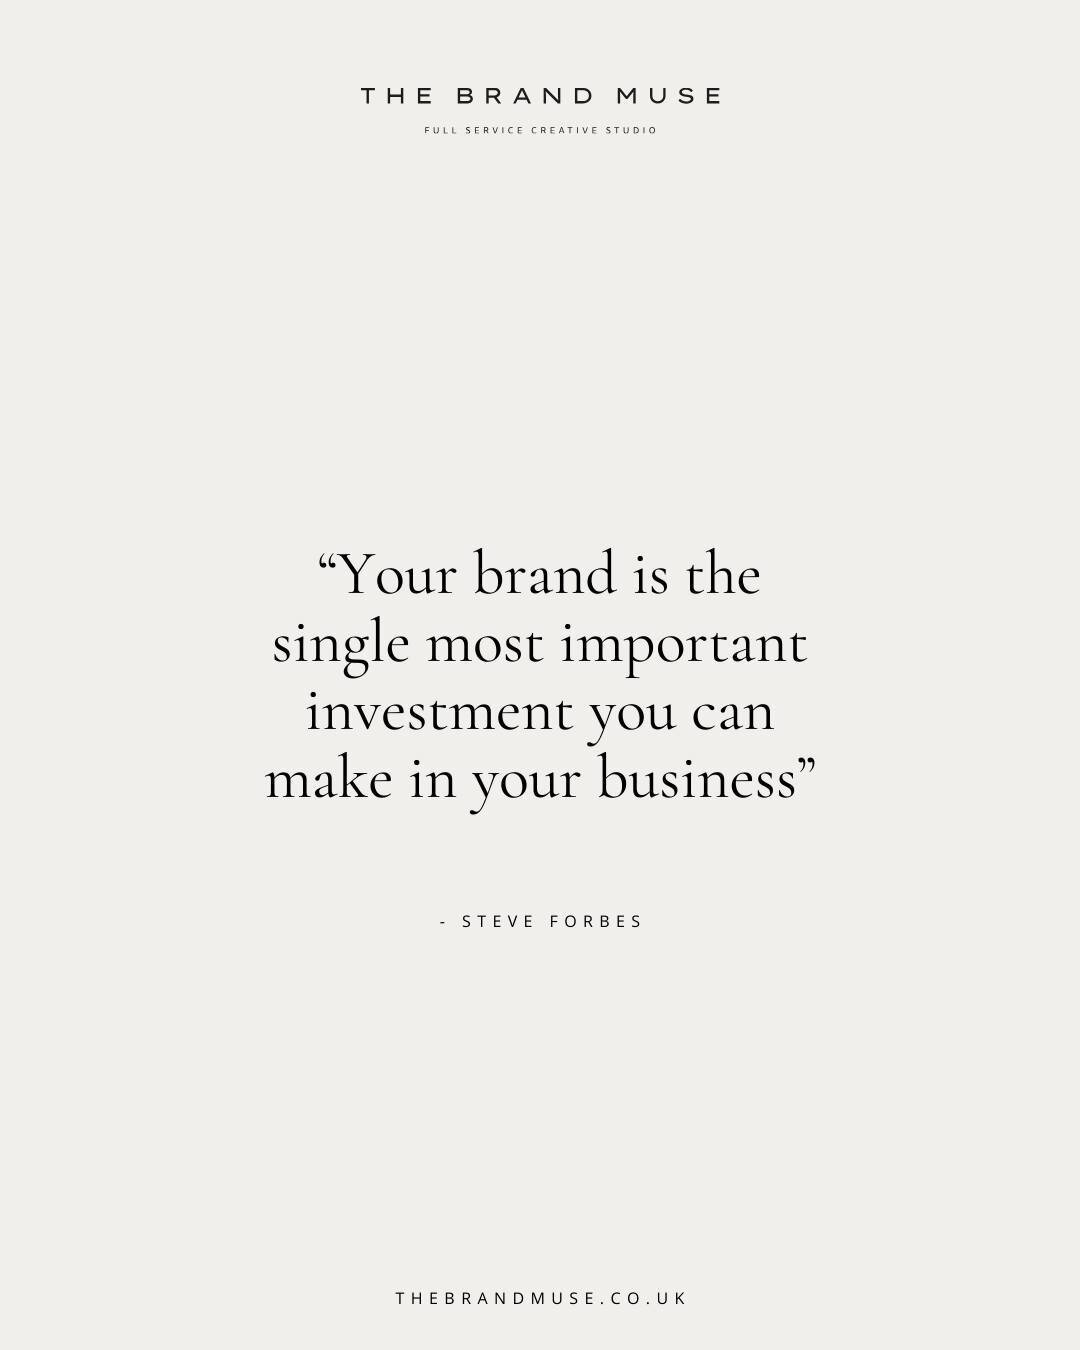 Every business owner has a story that's uniquely theirs, a narrative that sets them apart in a crowded market. ⁠
⁠
We believe in the power of distinctive branding, in creating an identity that's as unique as your story. ⁠
⁠
Let's embark on this journ